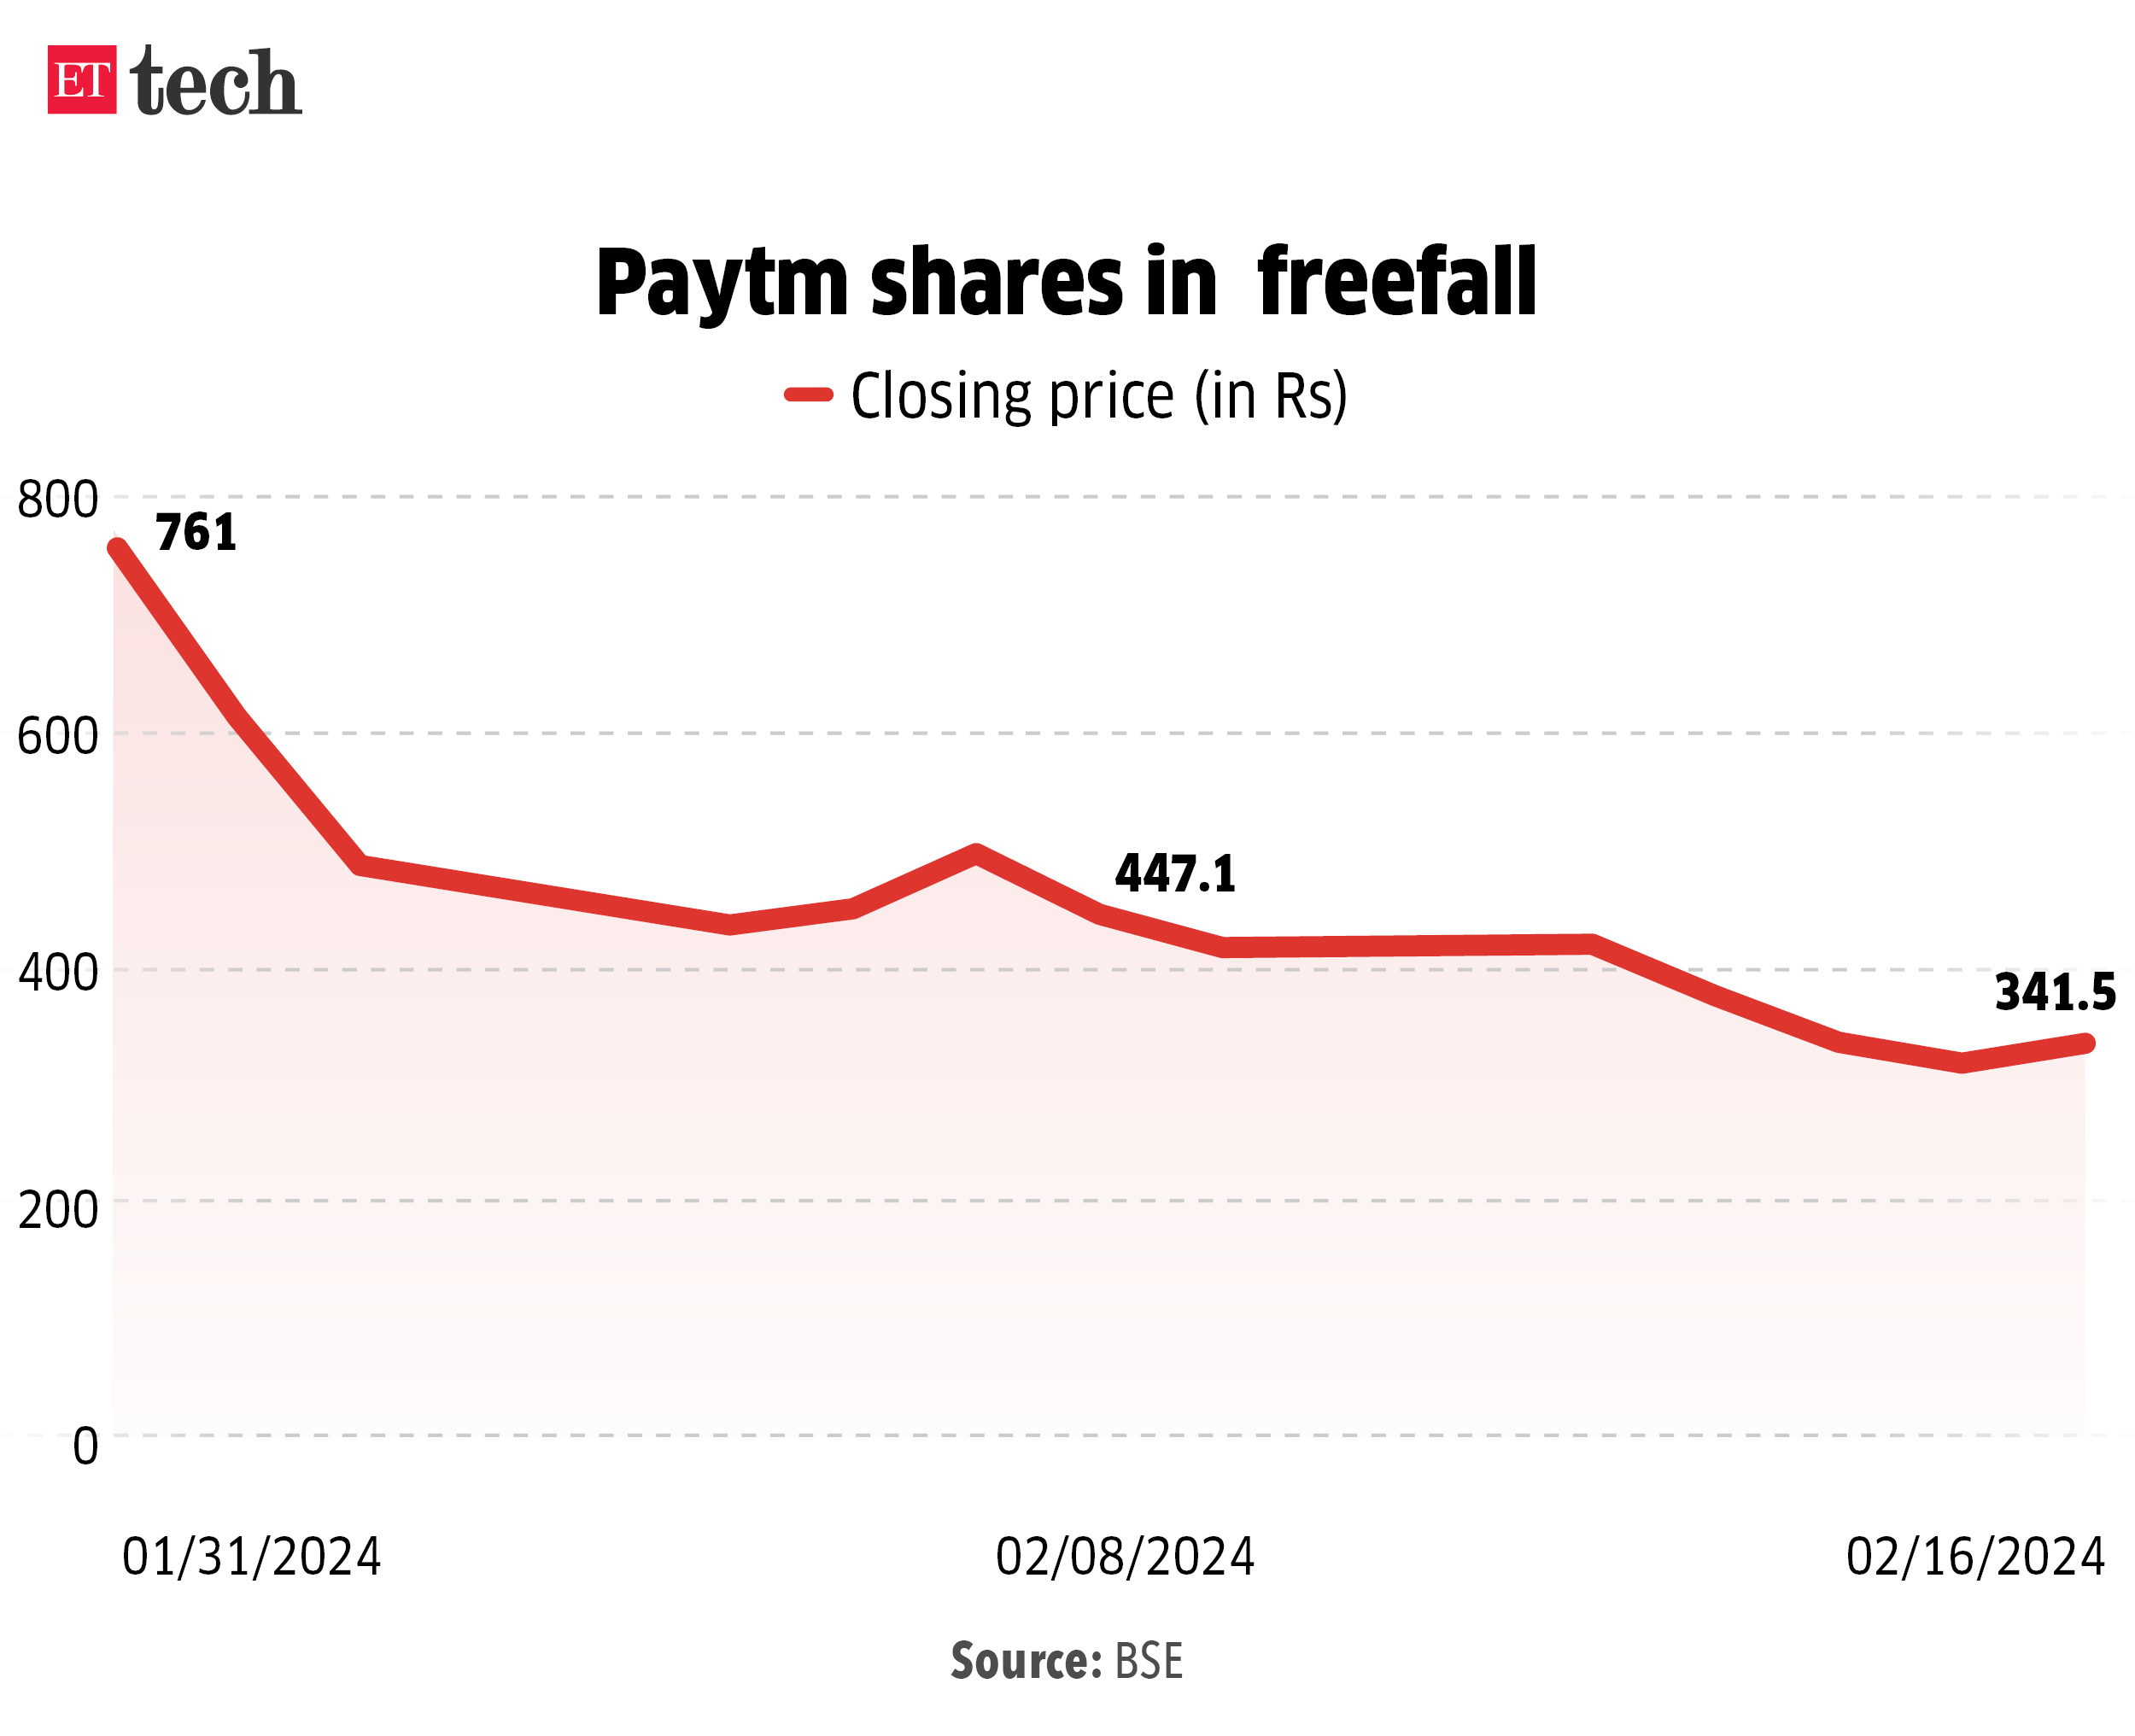 Paytm shares in freefall_16 Feb 2024_Graphic_ETTECH